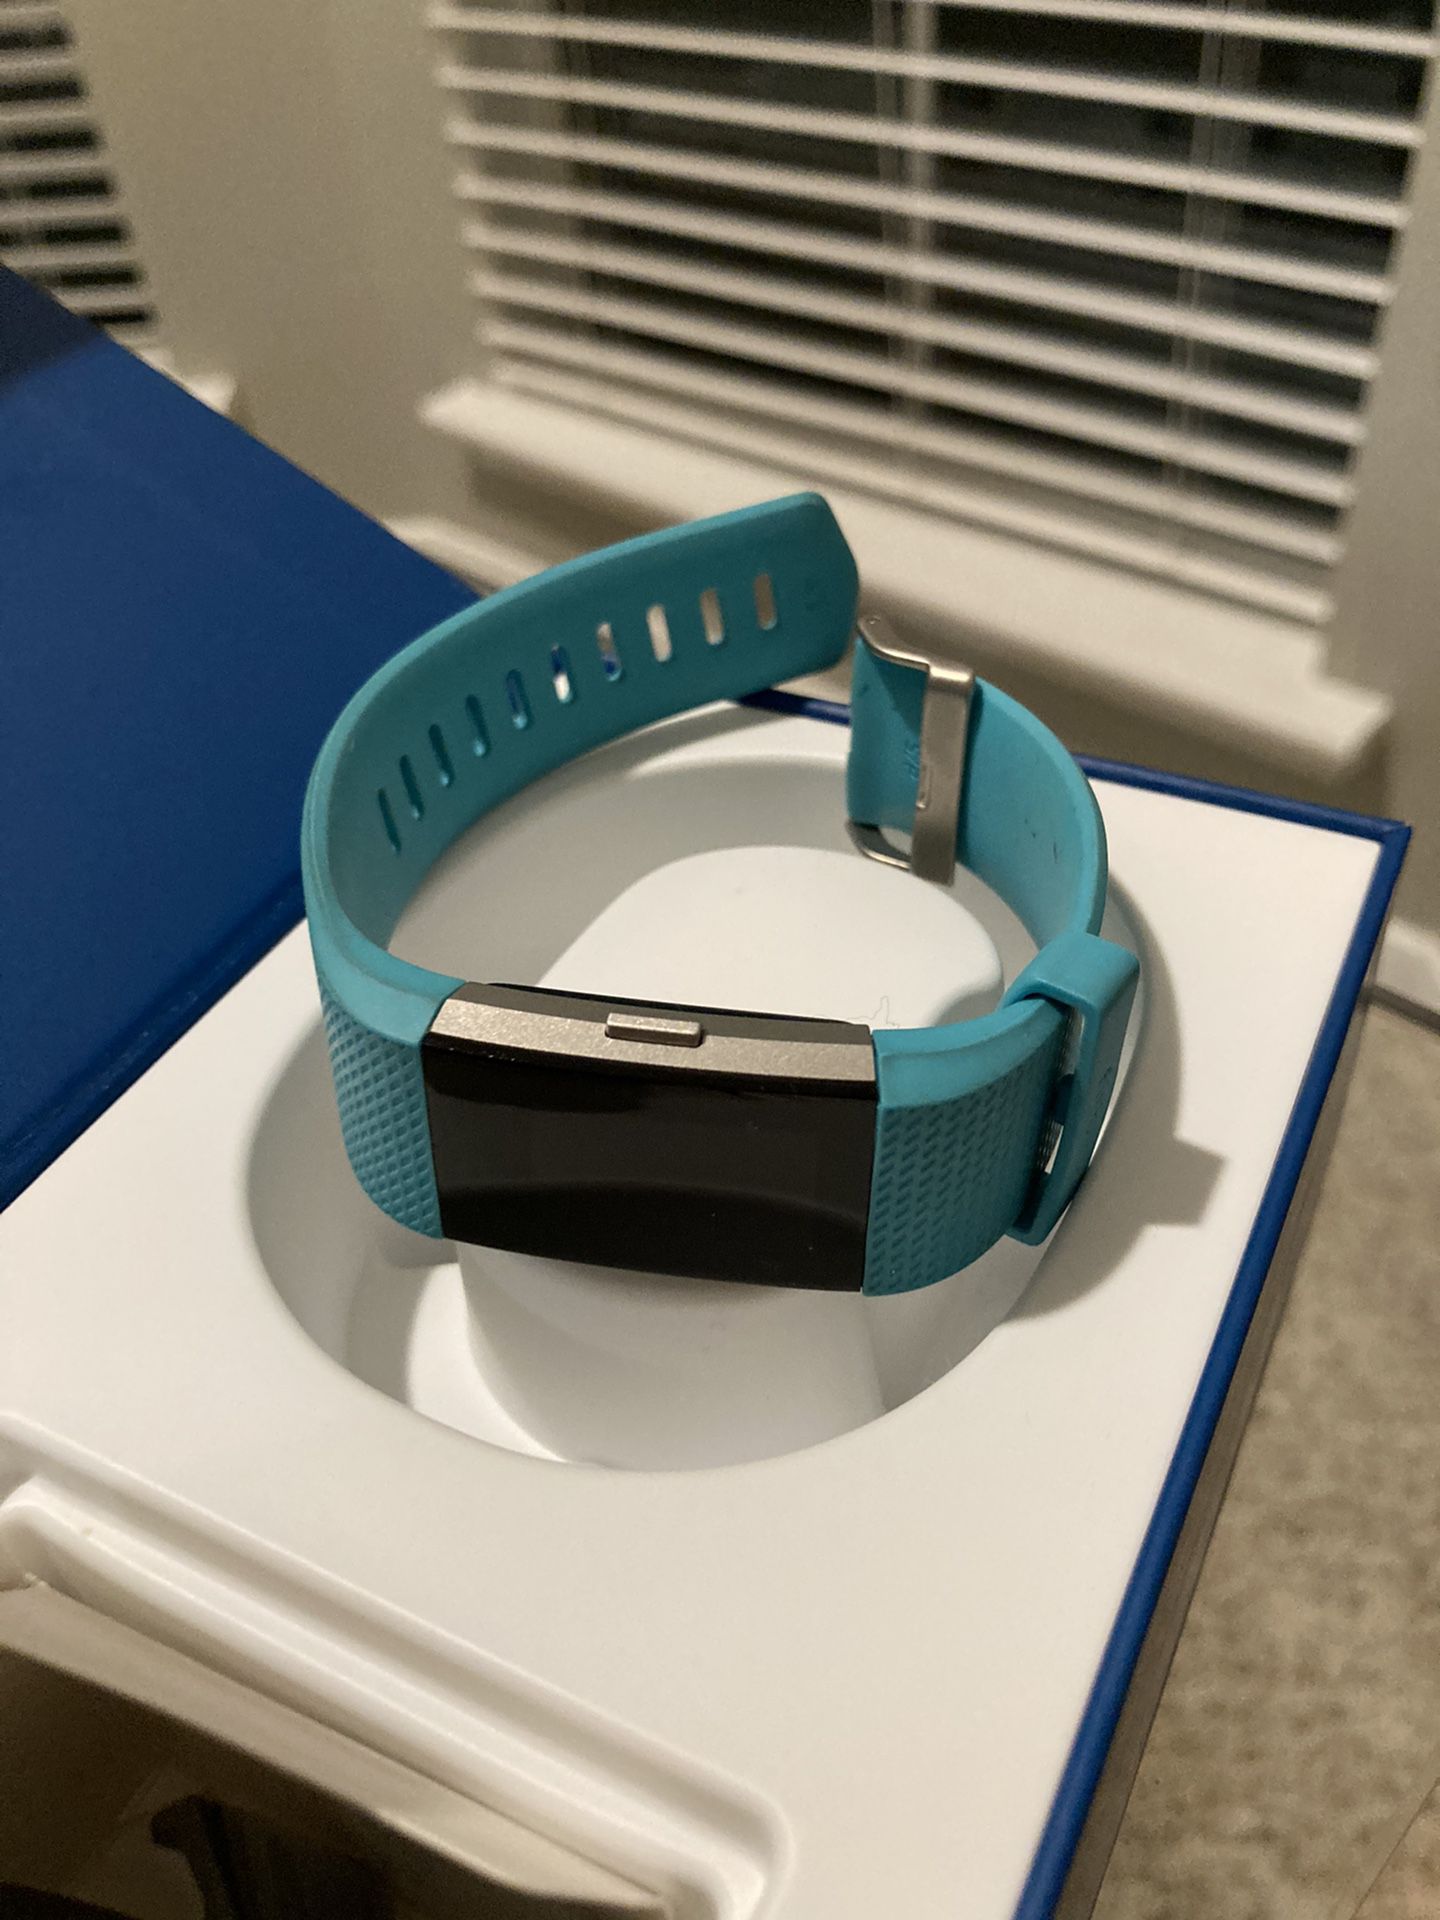 Fitbit Charge 2 Heart Rate Fitness Sleep Tracker Teal - SMALL $60!!!